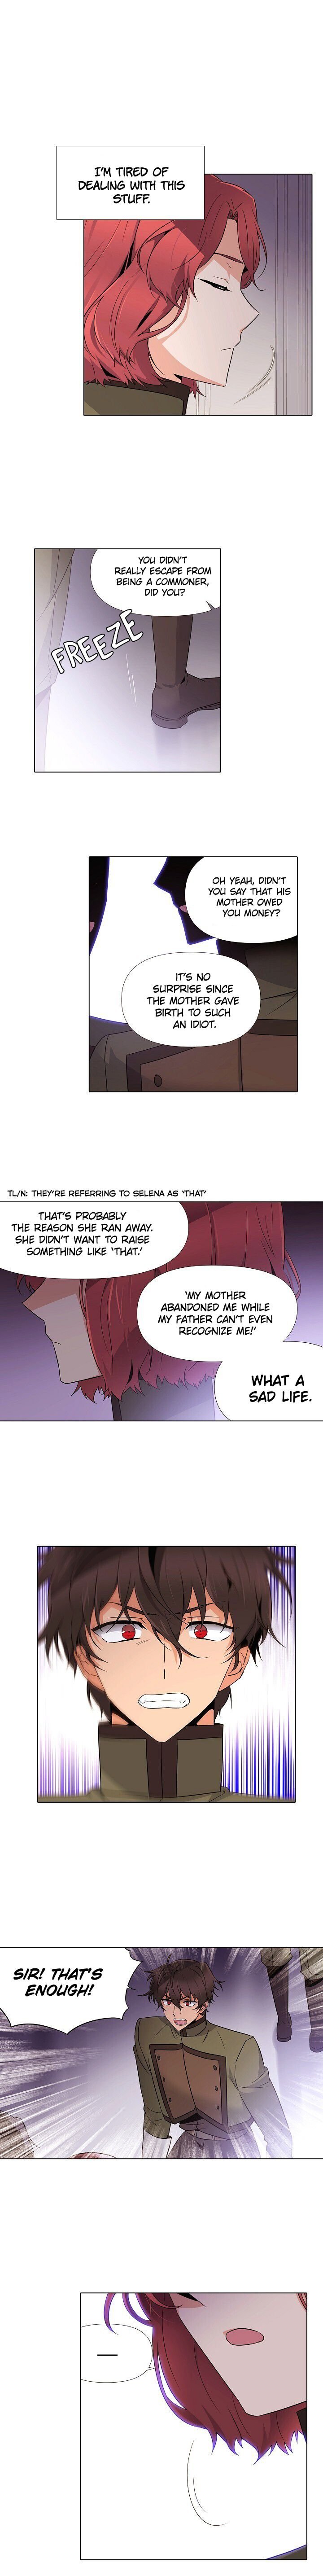 The Villain Discovered My Identity Chapter 20 - Page 6